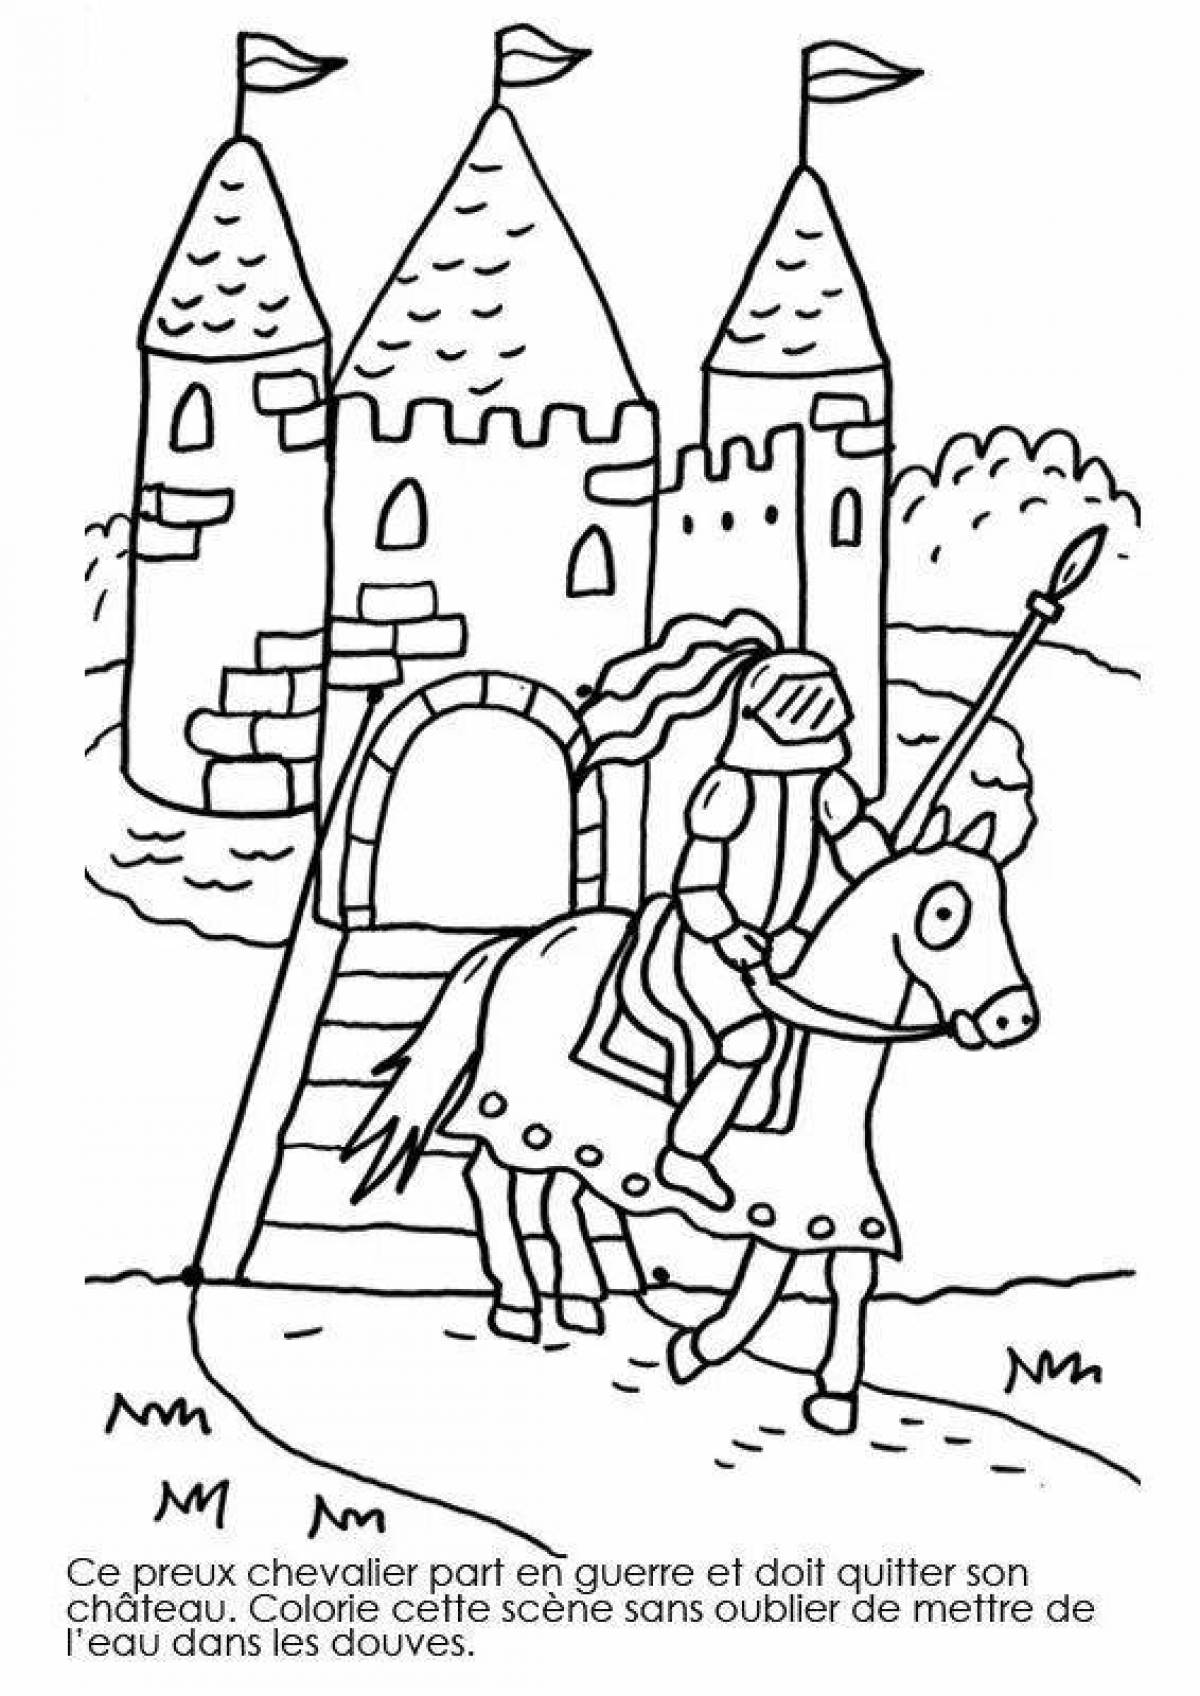 Glorious knight's castle coloring page